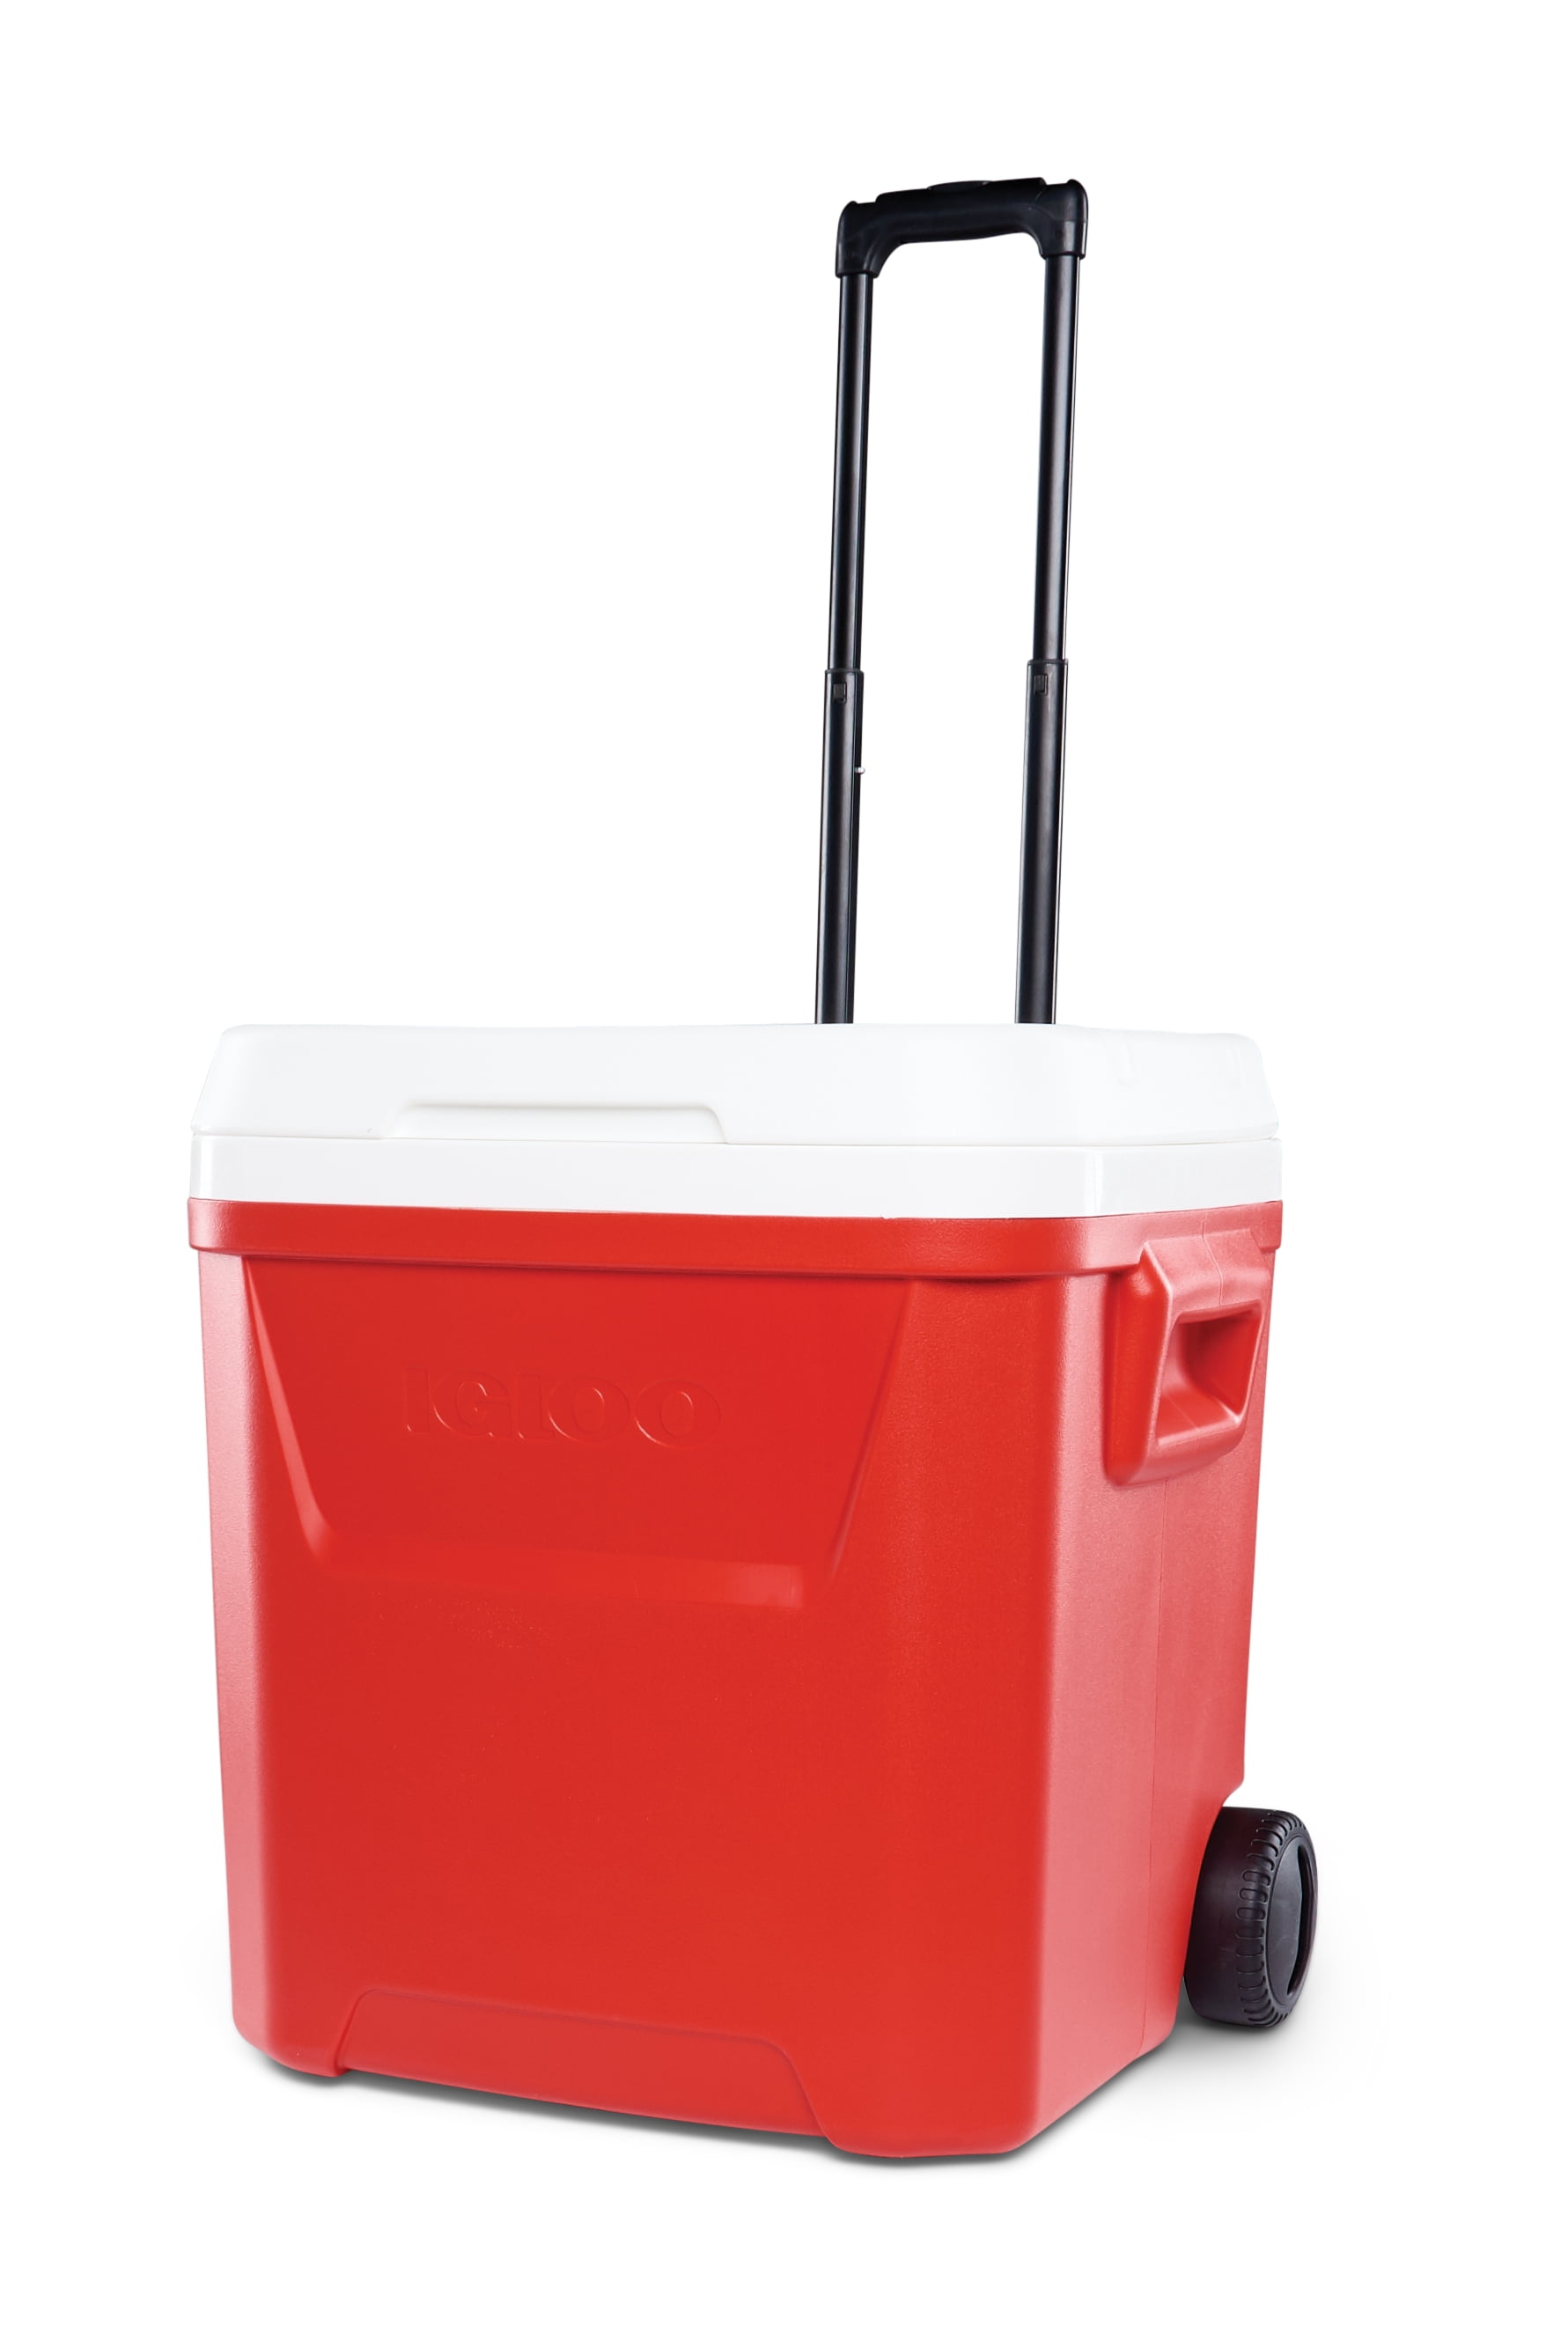 Igloo 60 Quart Ice Cube Rolling Cooler Red 